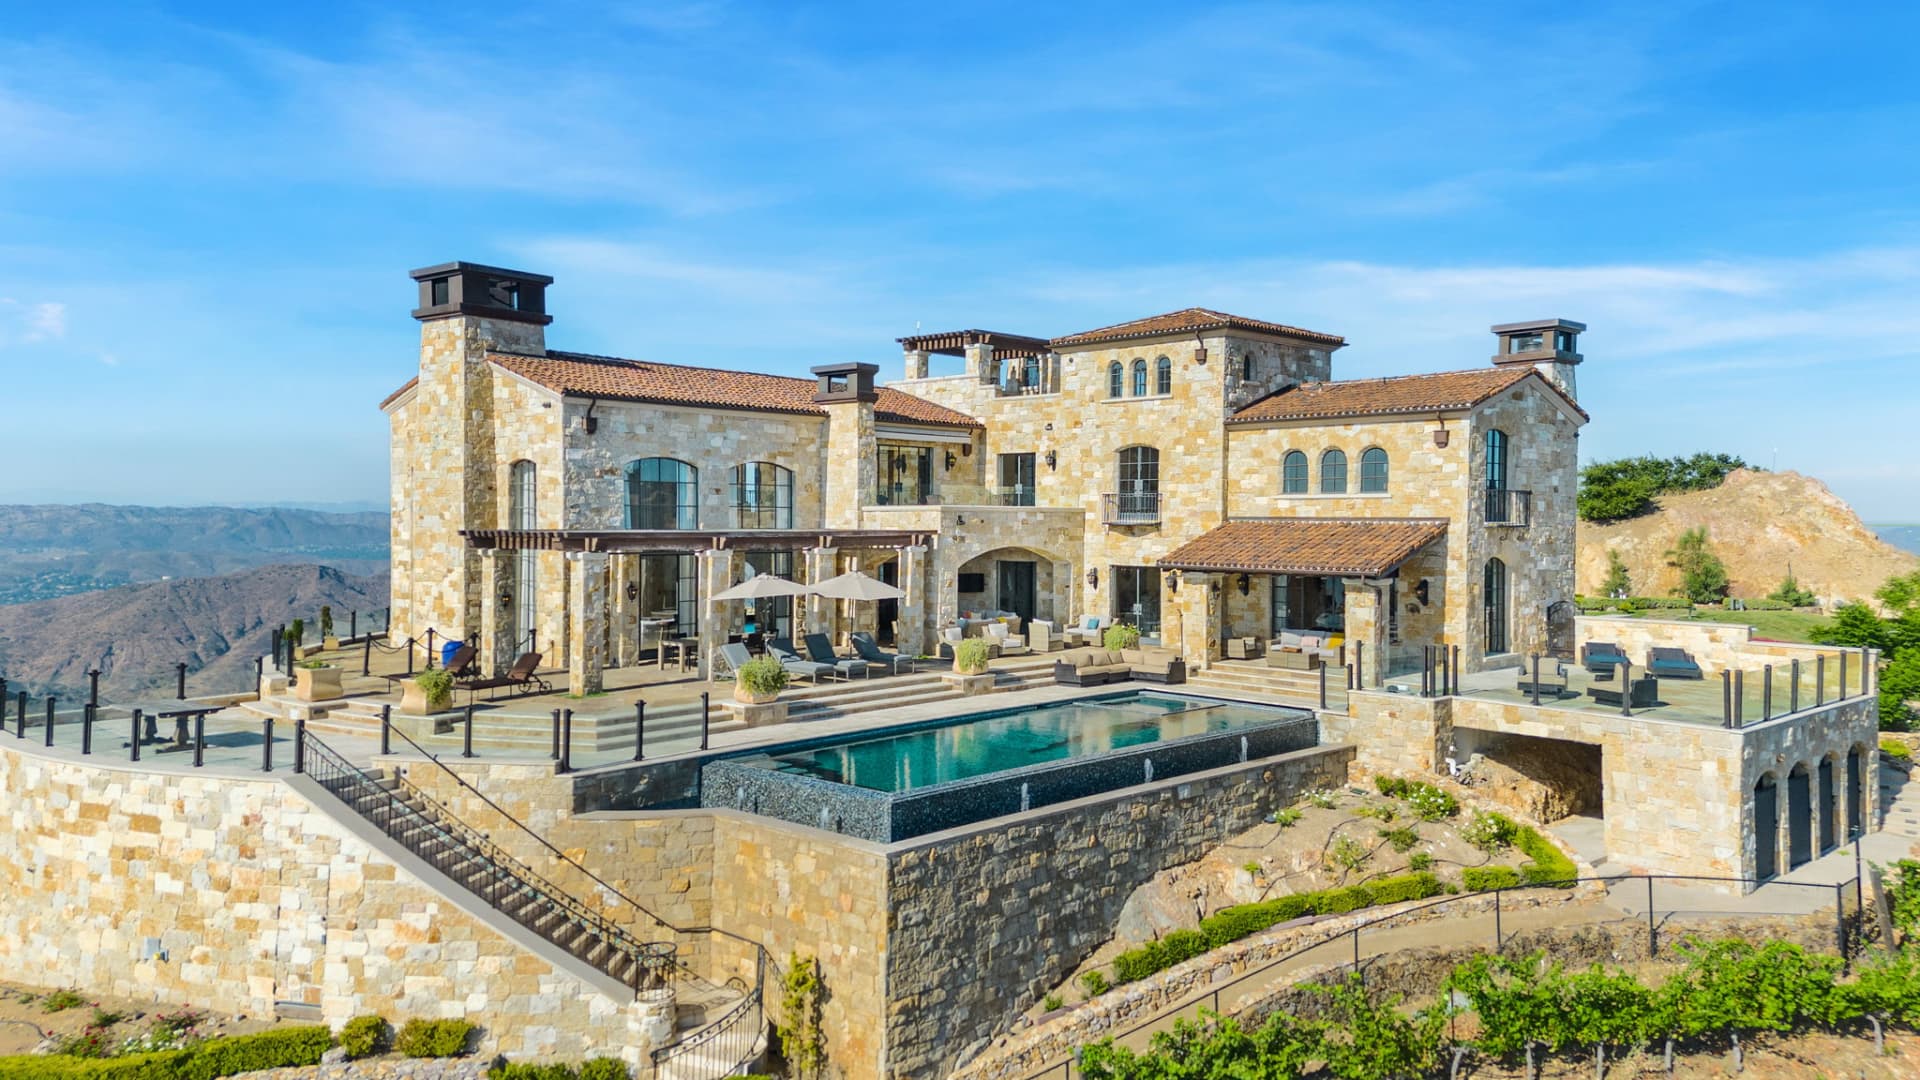 A view of the stone-clad villa's sundeck and infinity pool.